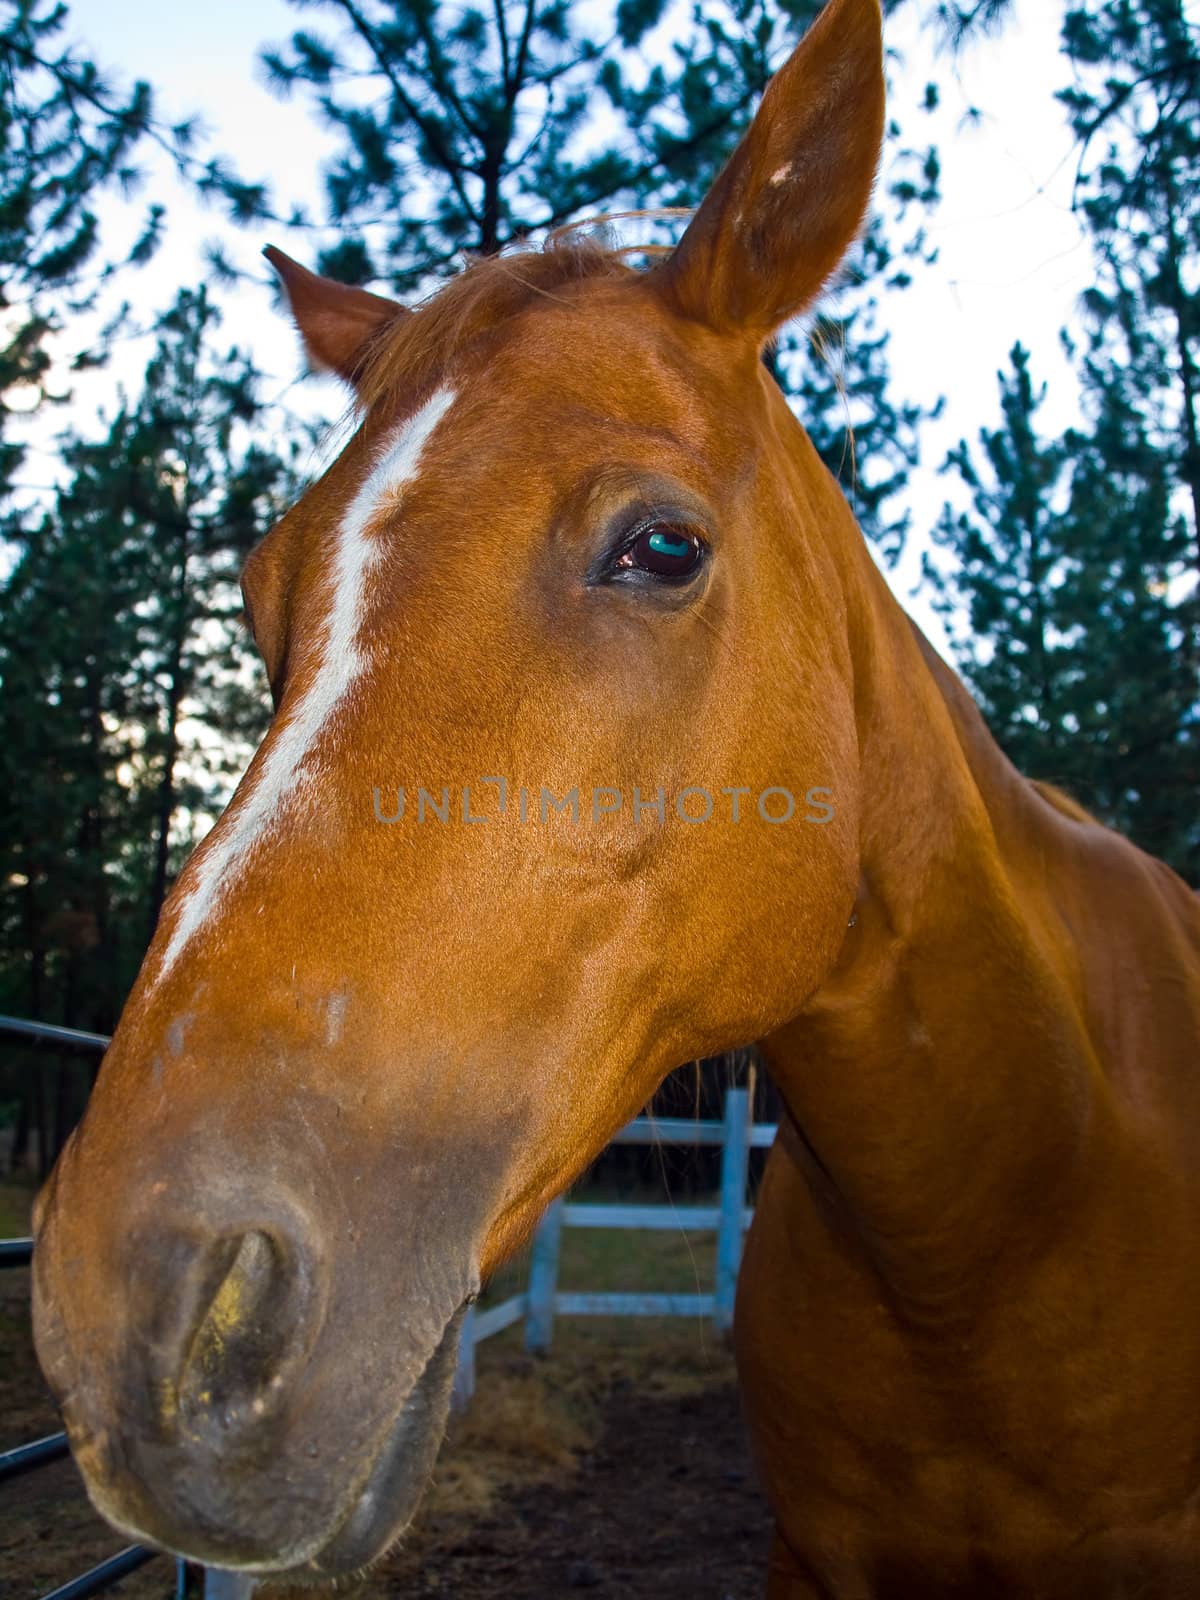 A Horse Portrait in the Evening Hour